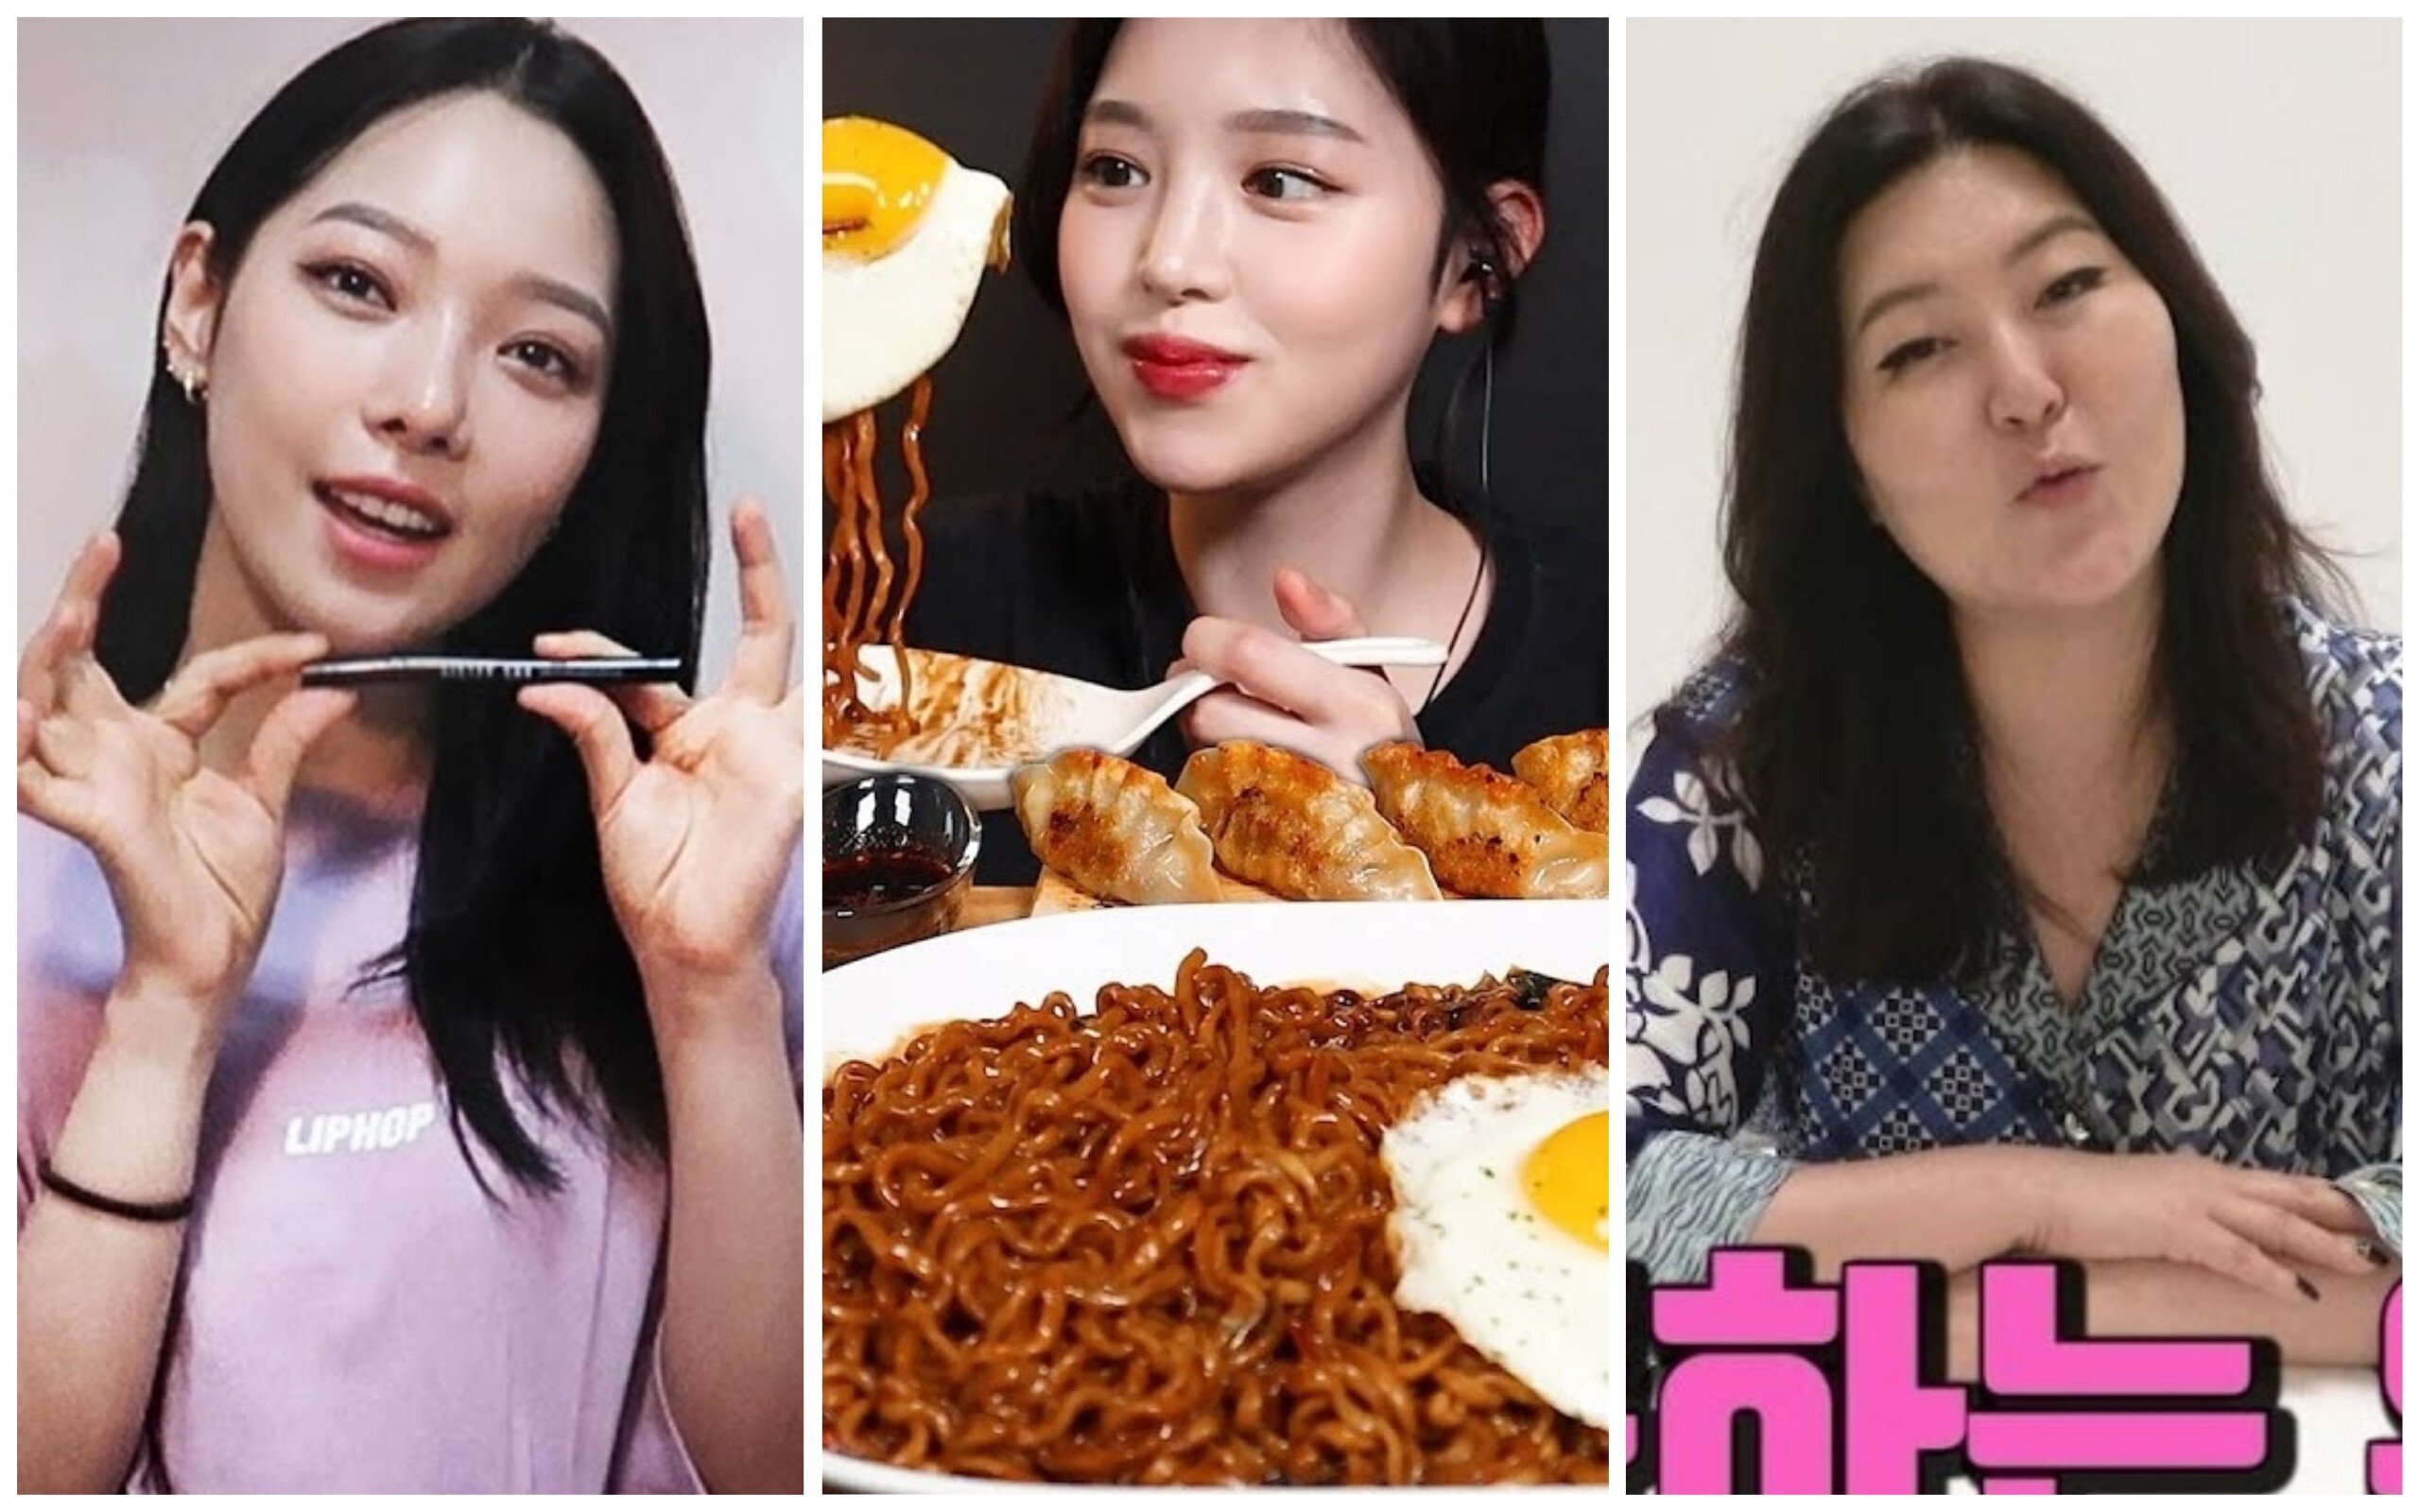 South Korean YouTuber stars are under fire for misleading there fans. Photo: YouTube/@Minny J 소민; @Eat with Boki; @슈스스TV